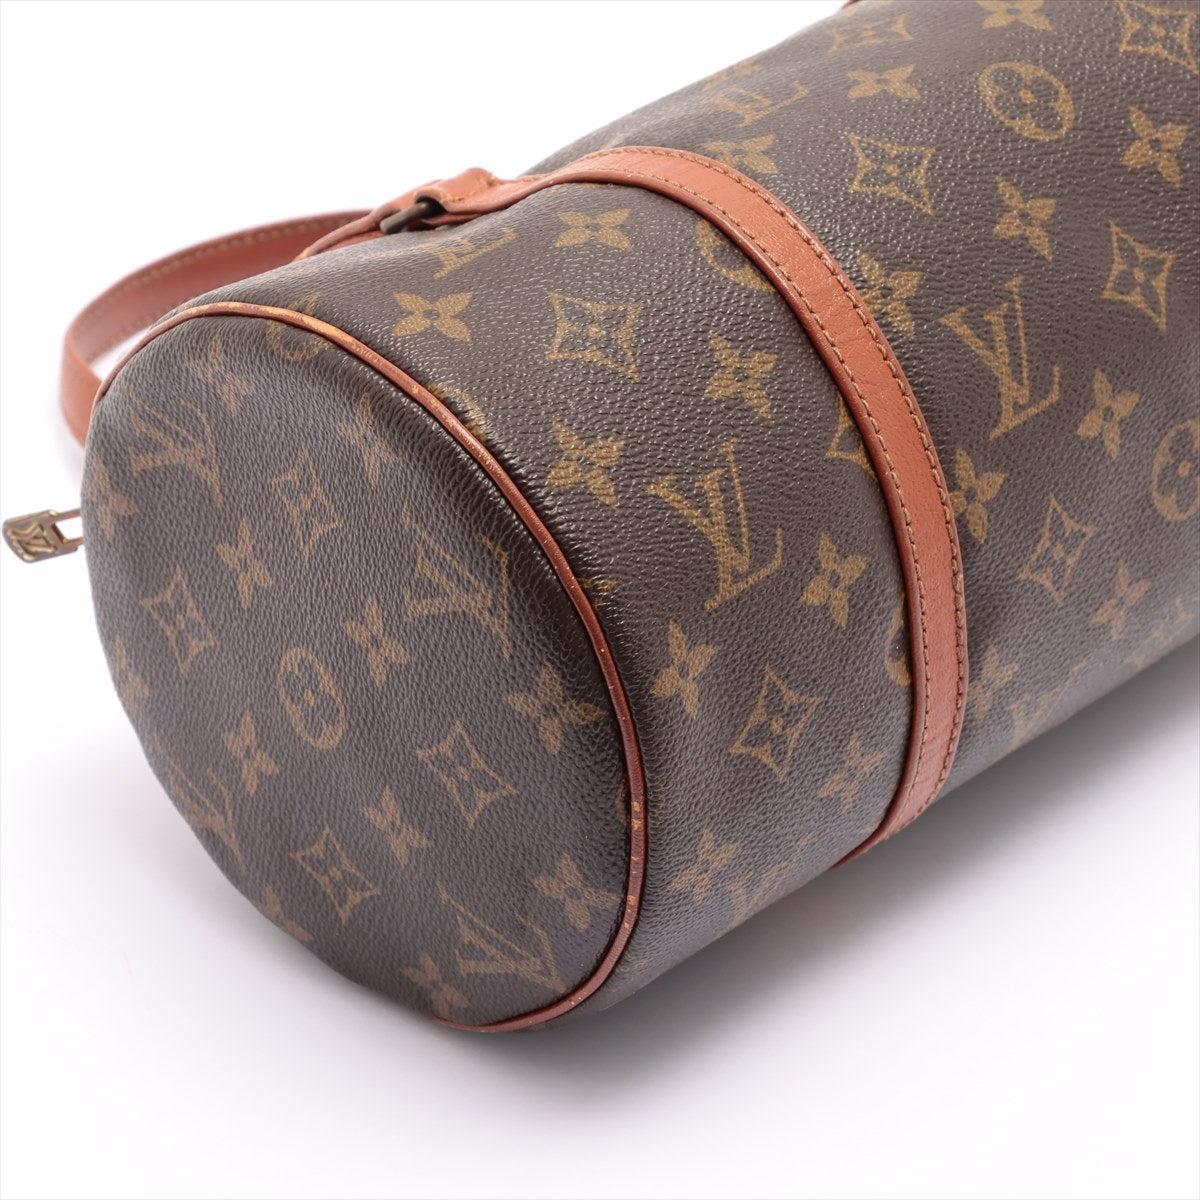 Brown and tan monogram coated canvas Louis Vuitton Papillon 30 cm with gold-tone In Fair Condition For Sale In Irvine, CA